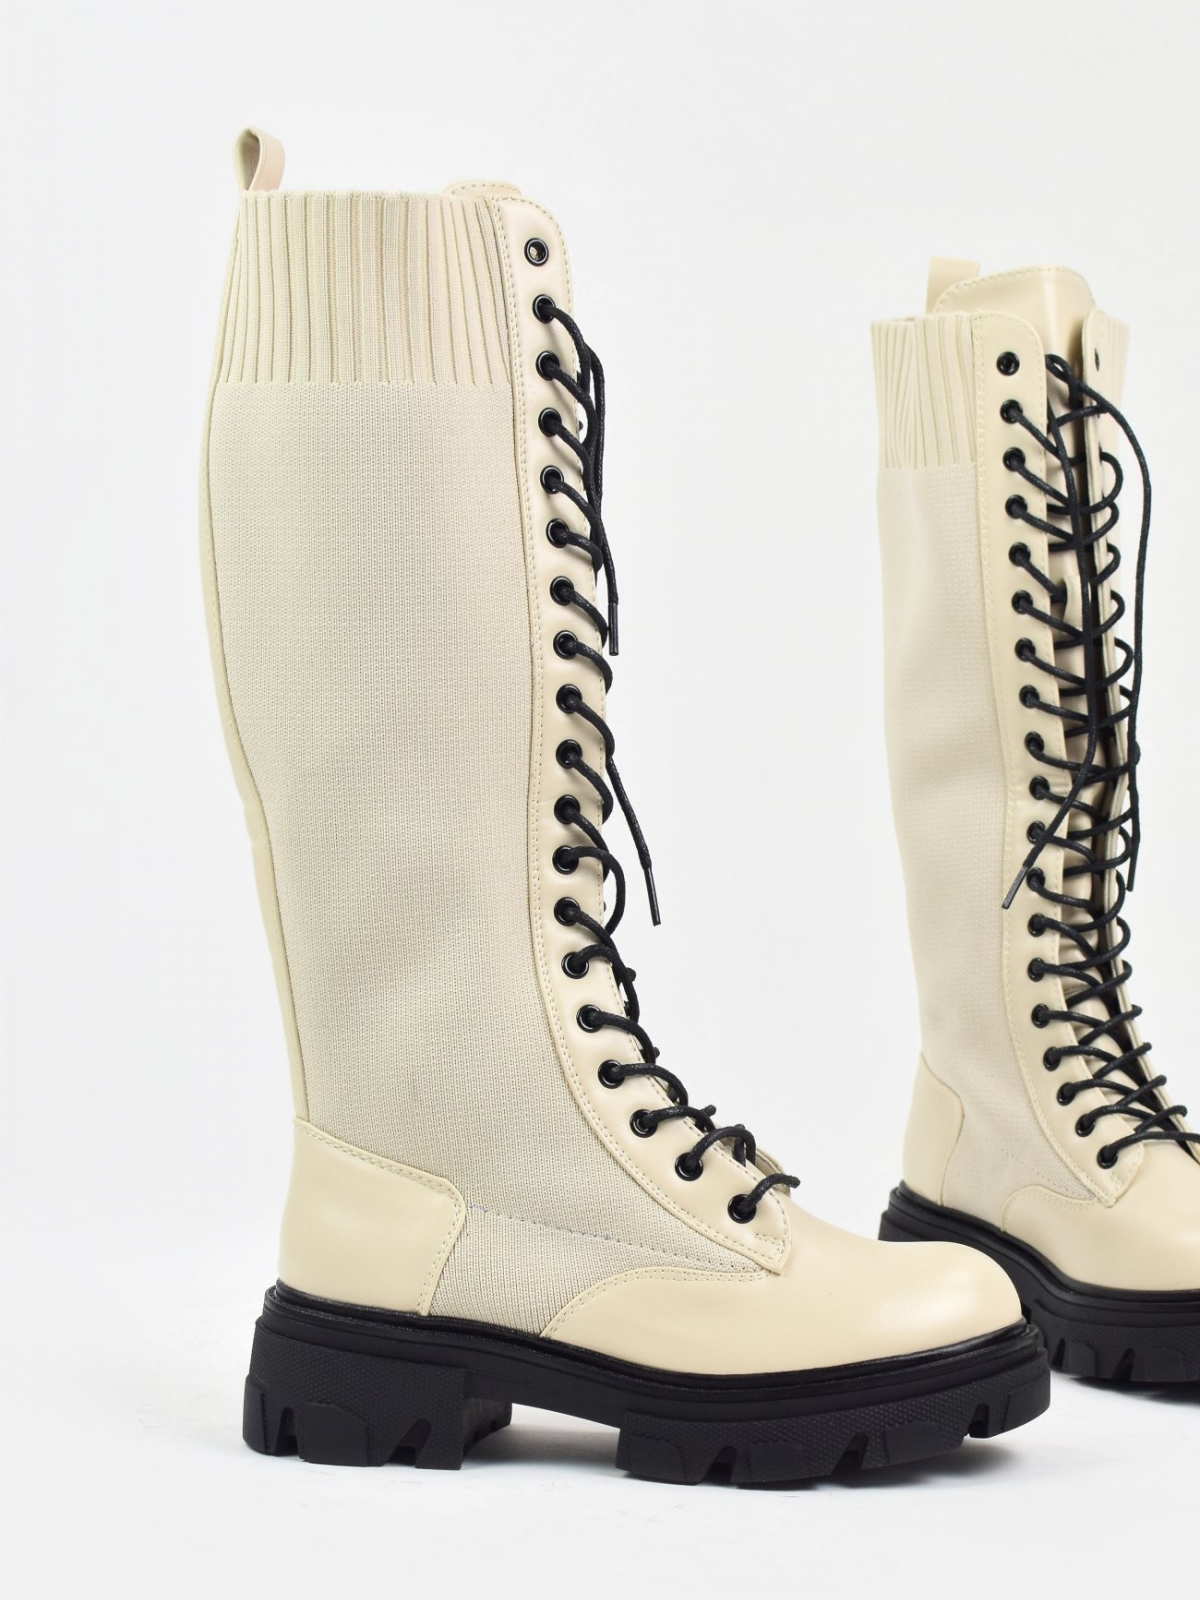 Lace up knitted knee high boots in neutral & black